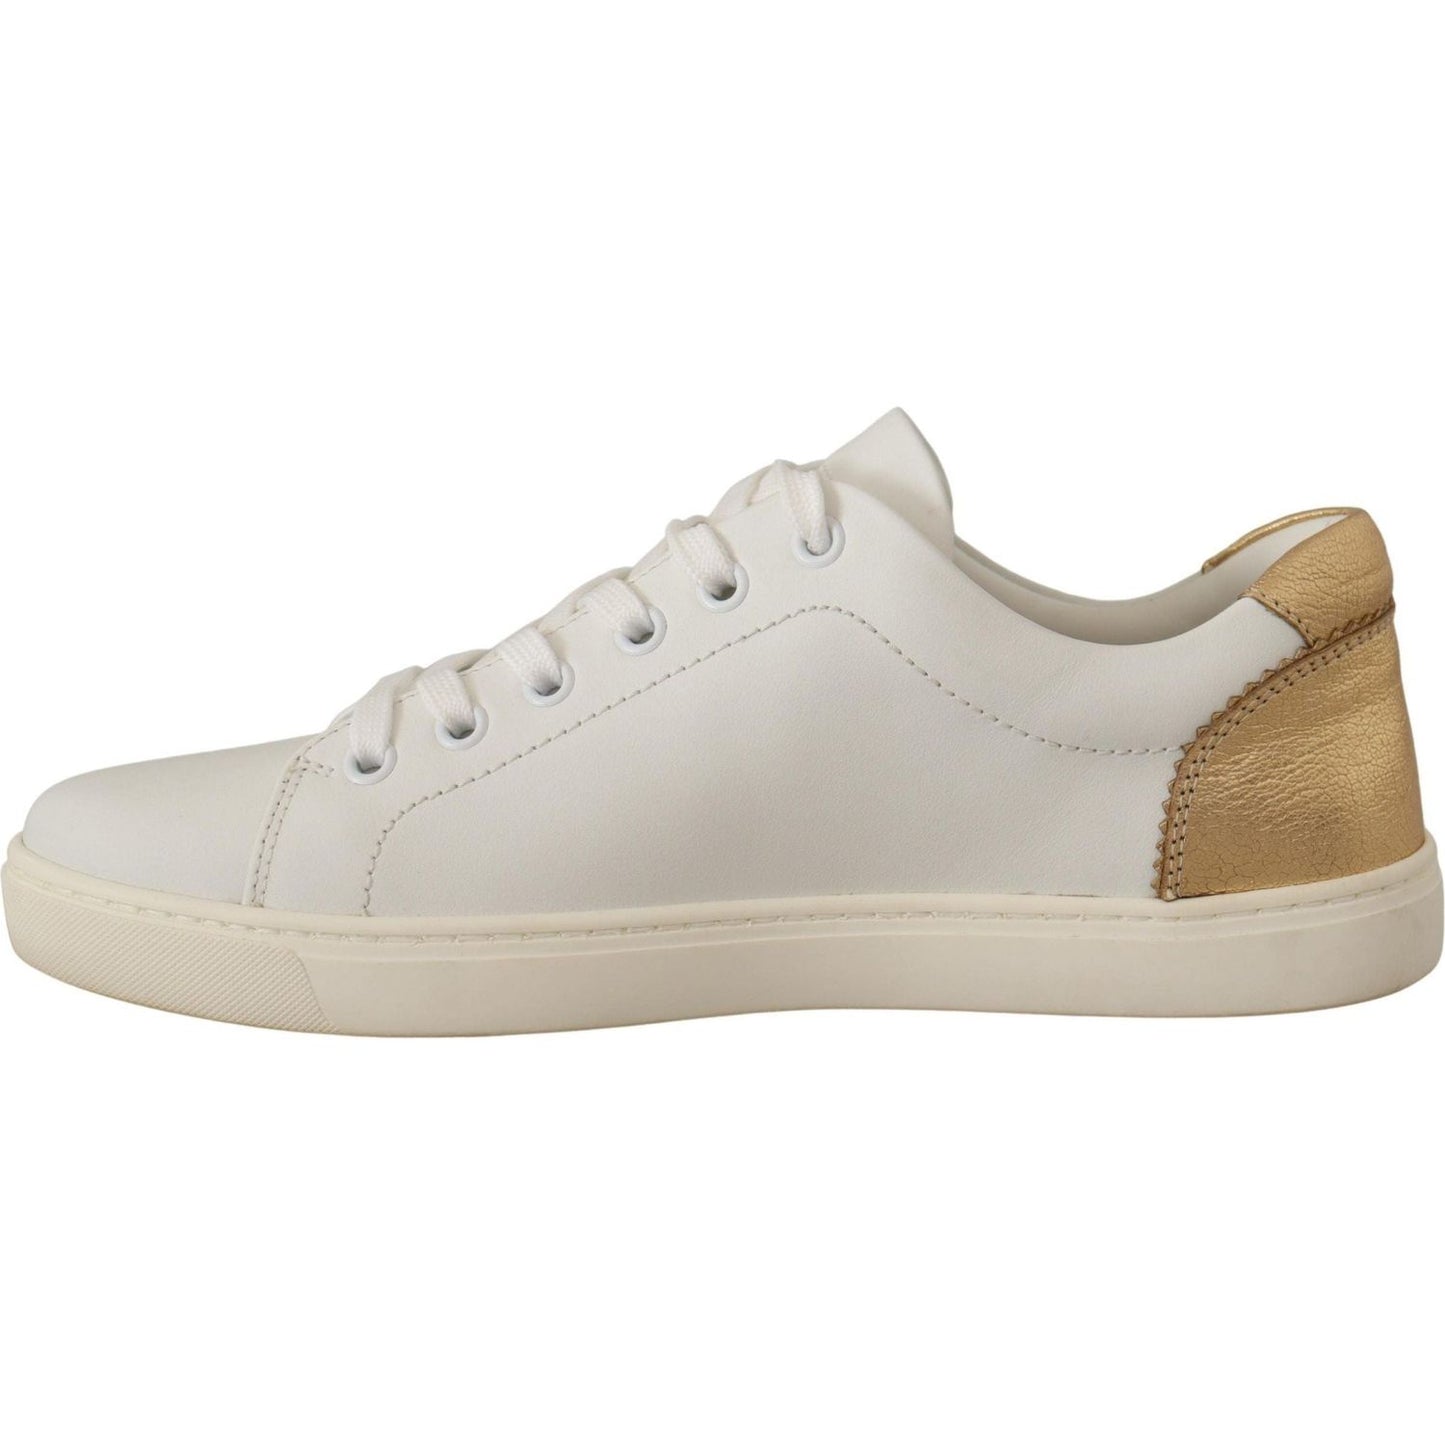 Dolce & Gabbana Elegant White Leather Sneakers with Gold Accents white-gold-leather-low-top-sneakers